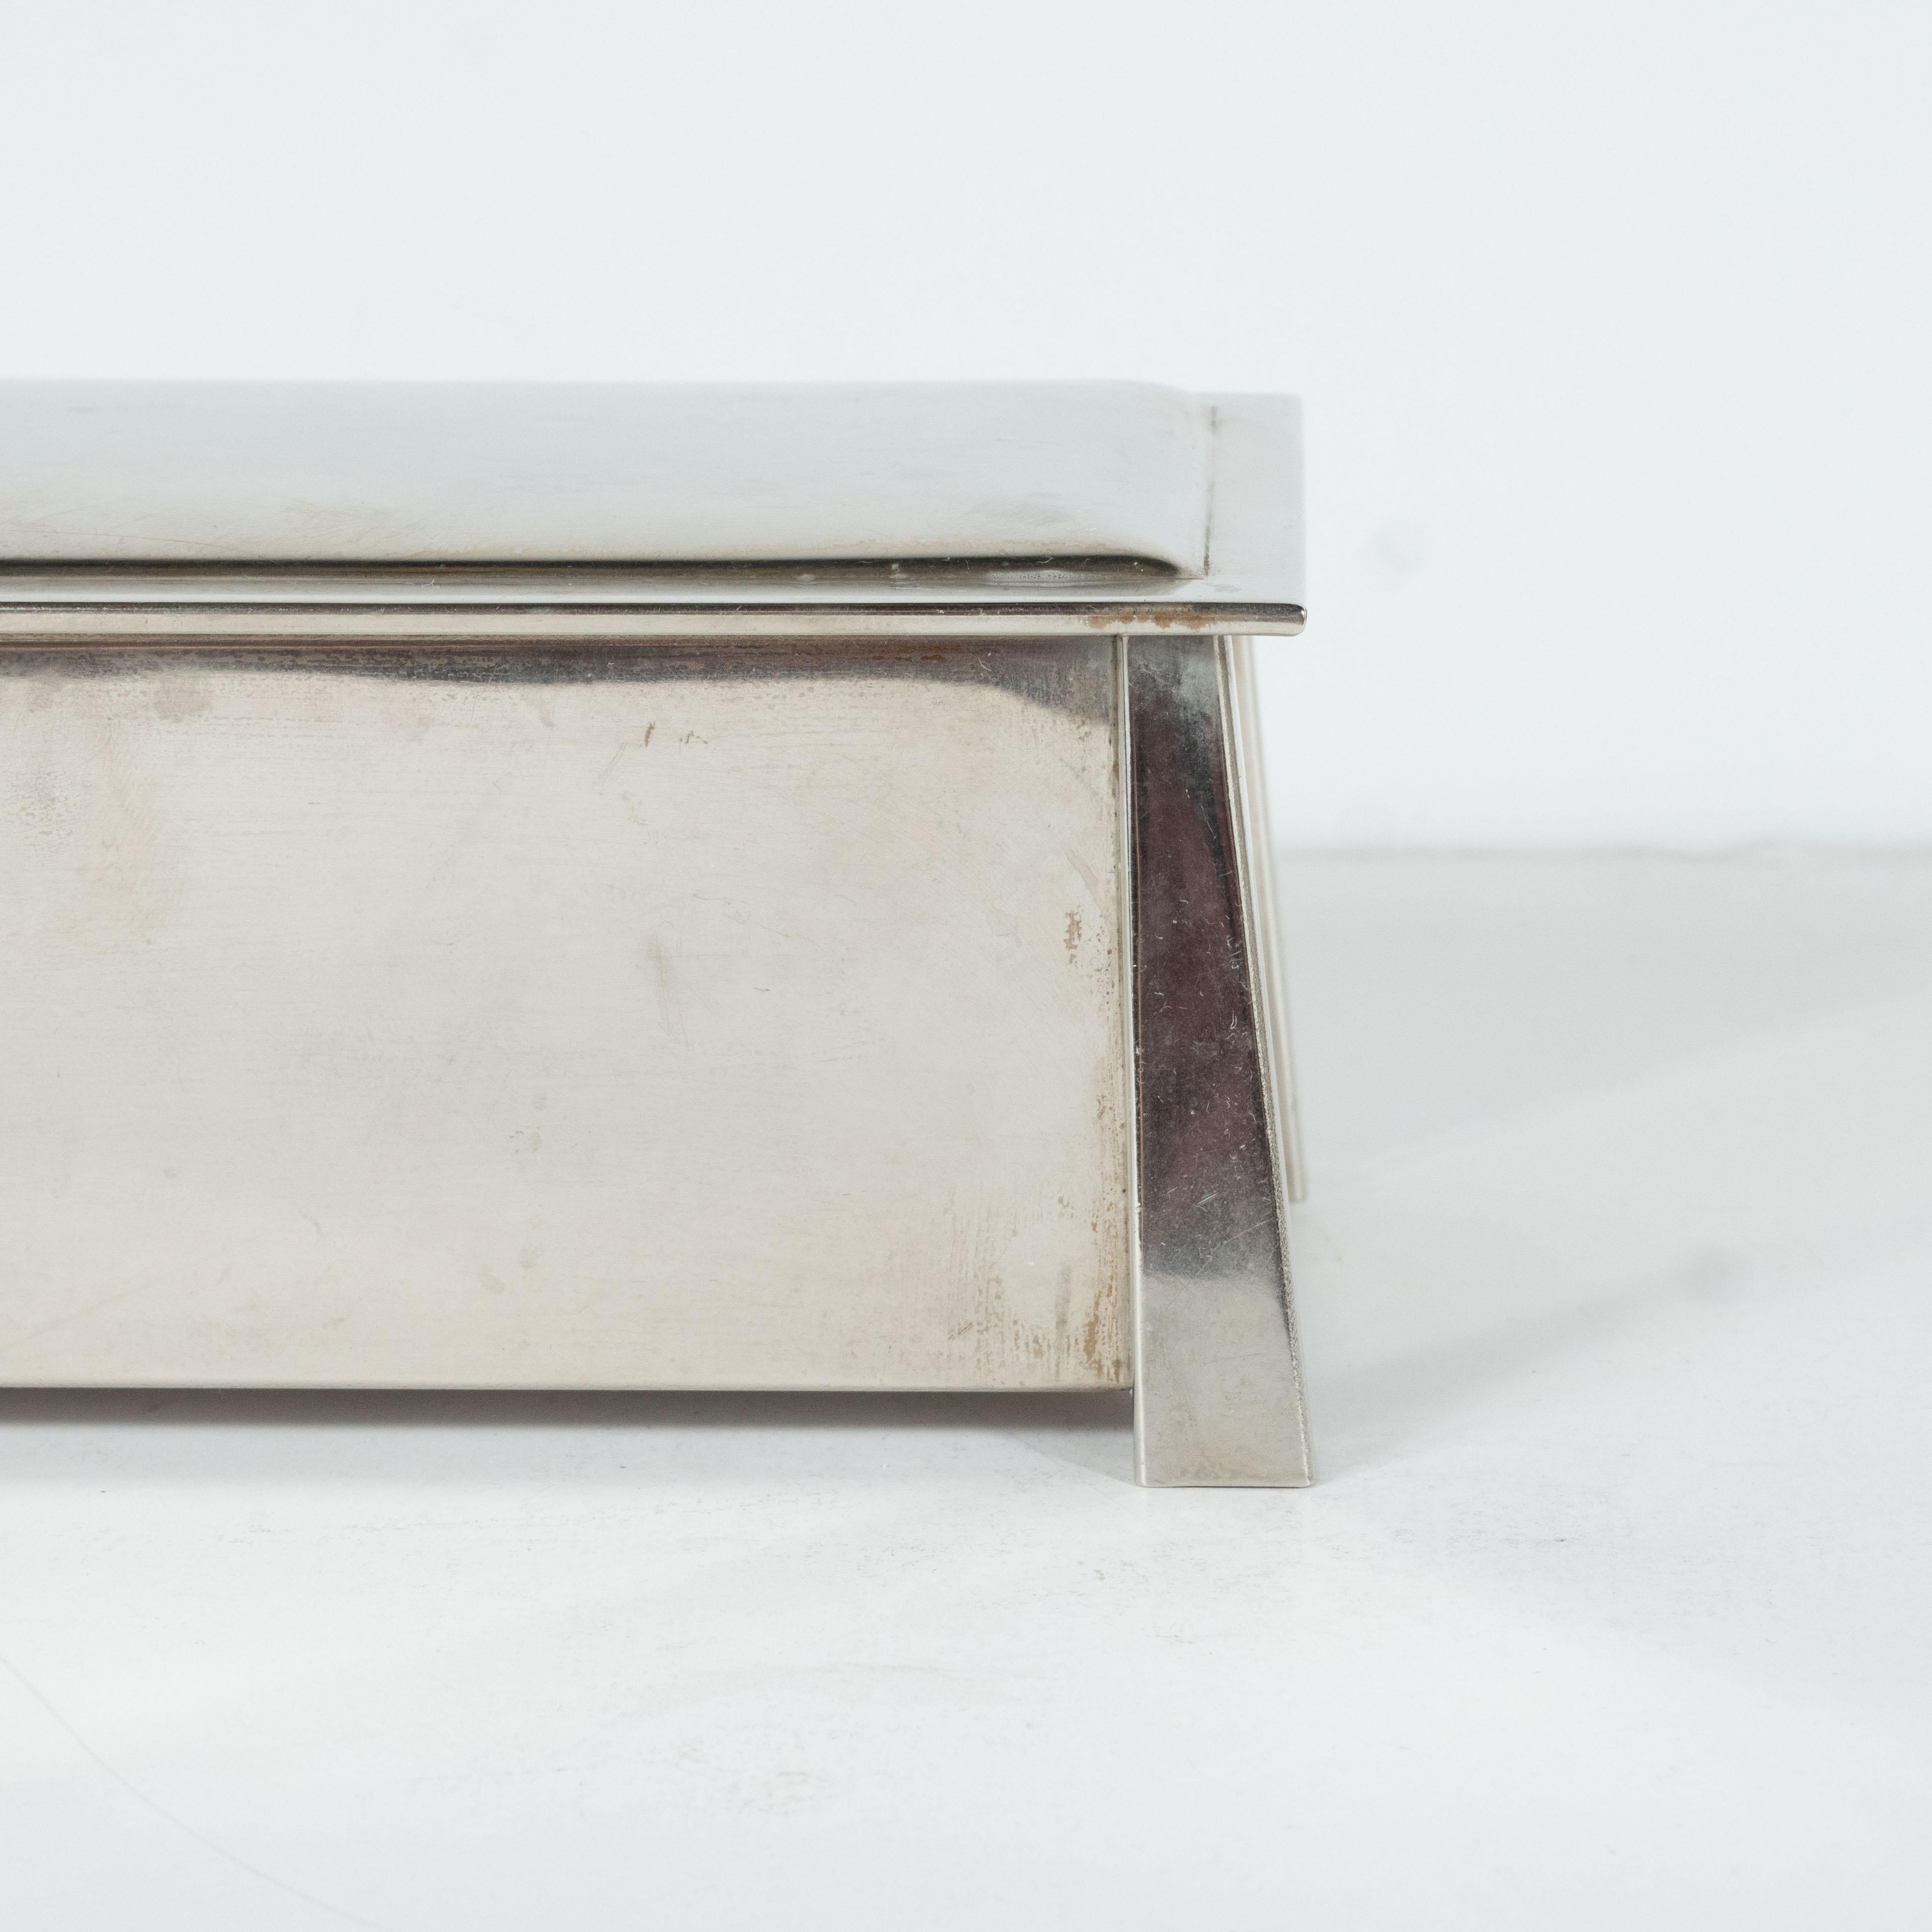 This elegant Art Deco Machine Age box was realized by the renowned silversmith studio L. & M.T. Co. in the United States, circa 1935. It features a subtly convex two tier skyscraper style rectangular top that peaks over the volumetric tapered